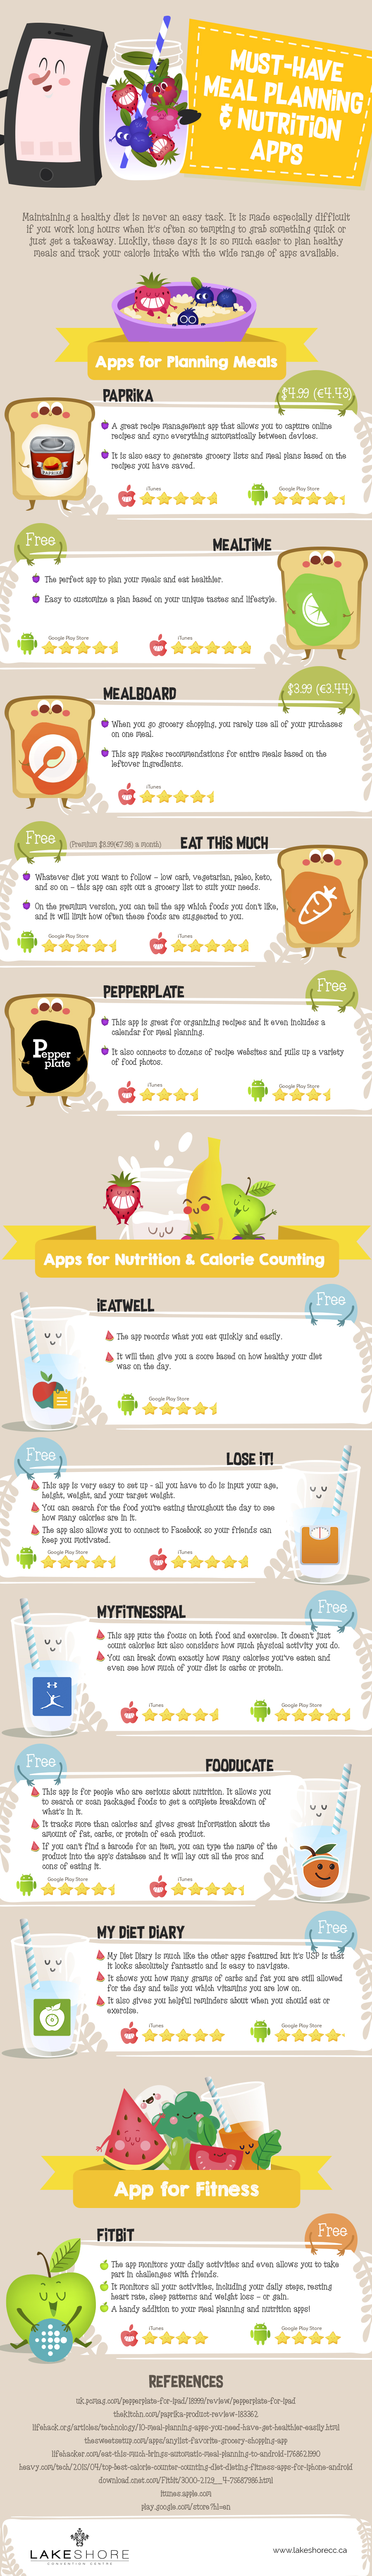 Living Mindfully: Great Meal Planning and Nutrition Apps - Infographic